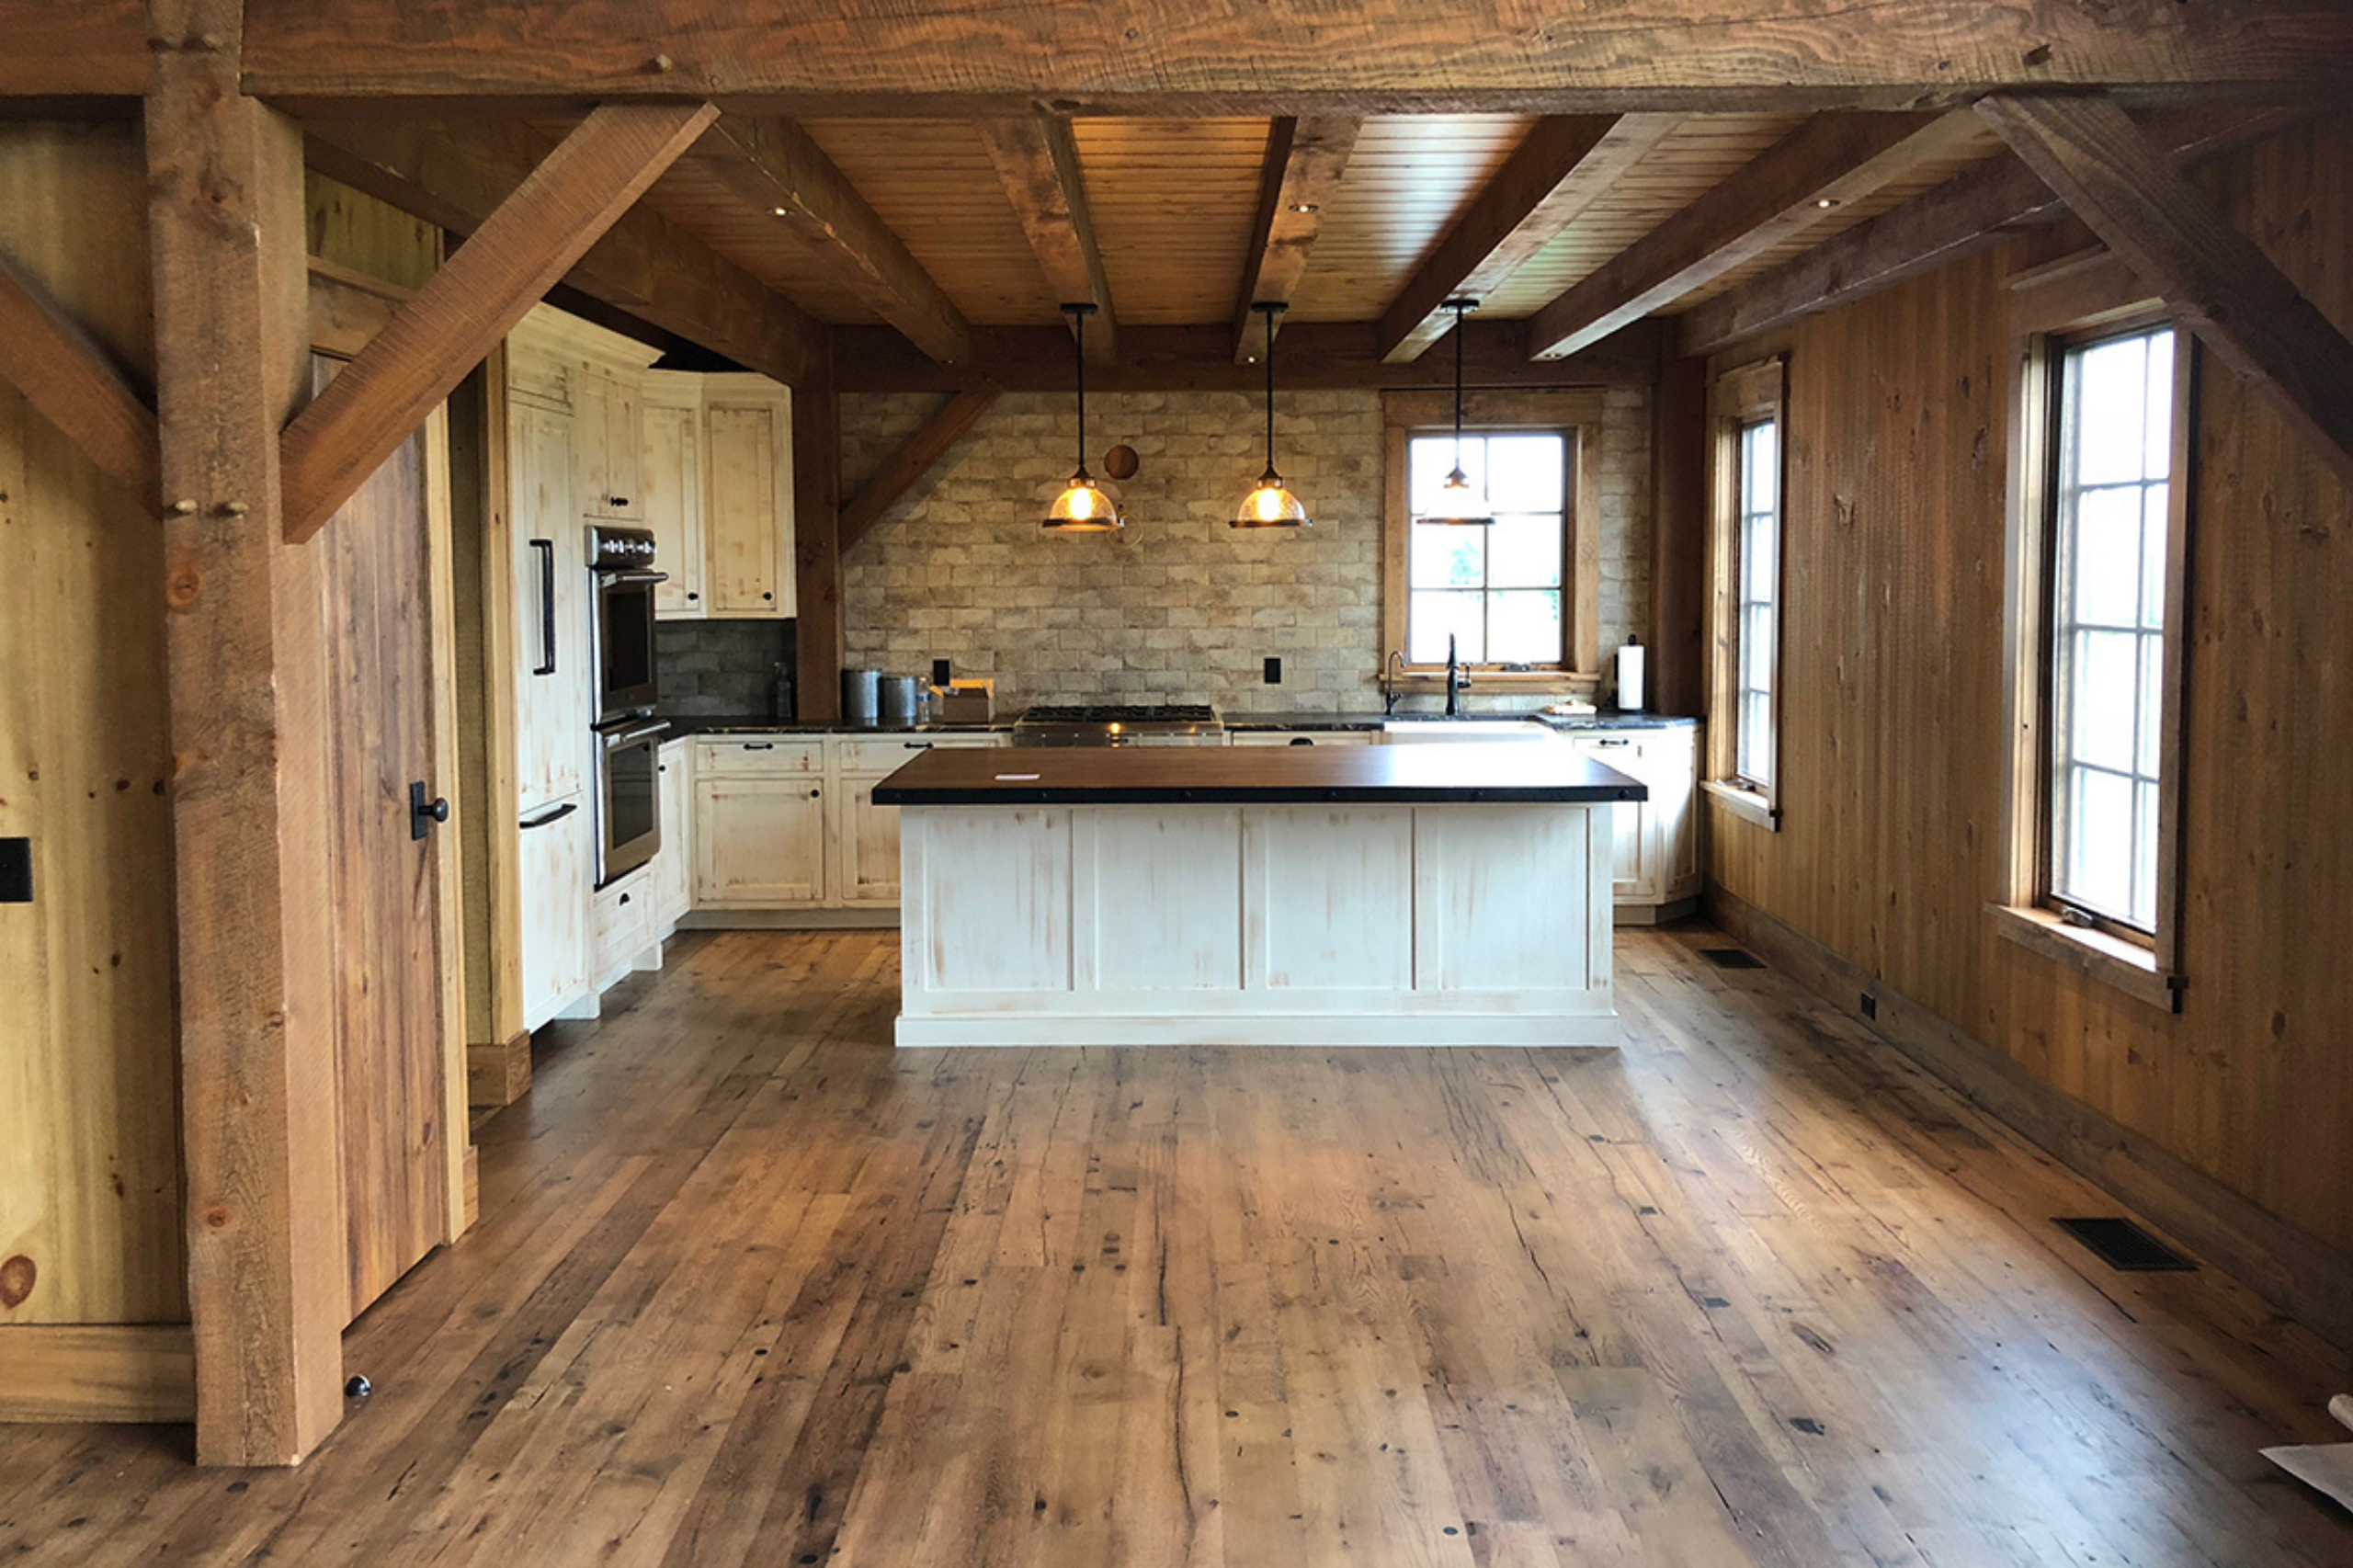 Why You Should Consider Using Reclaimed Wood for Your Homes Interior -  Sebring Design Build